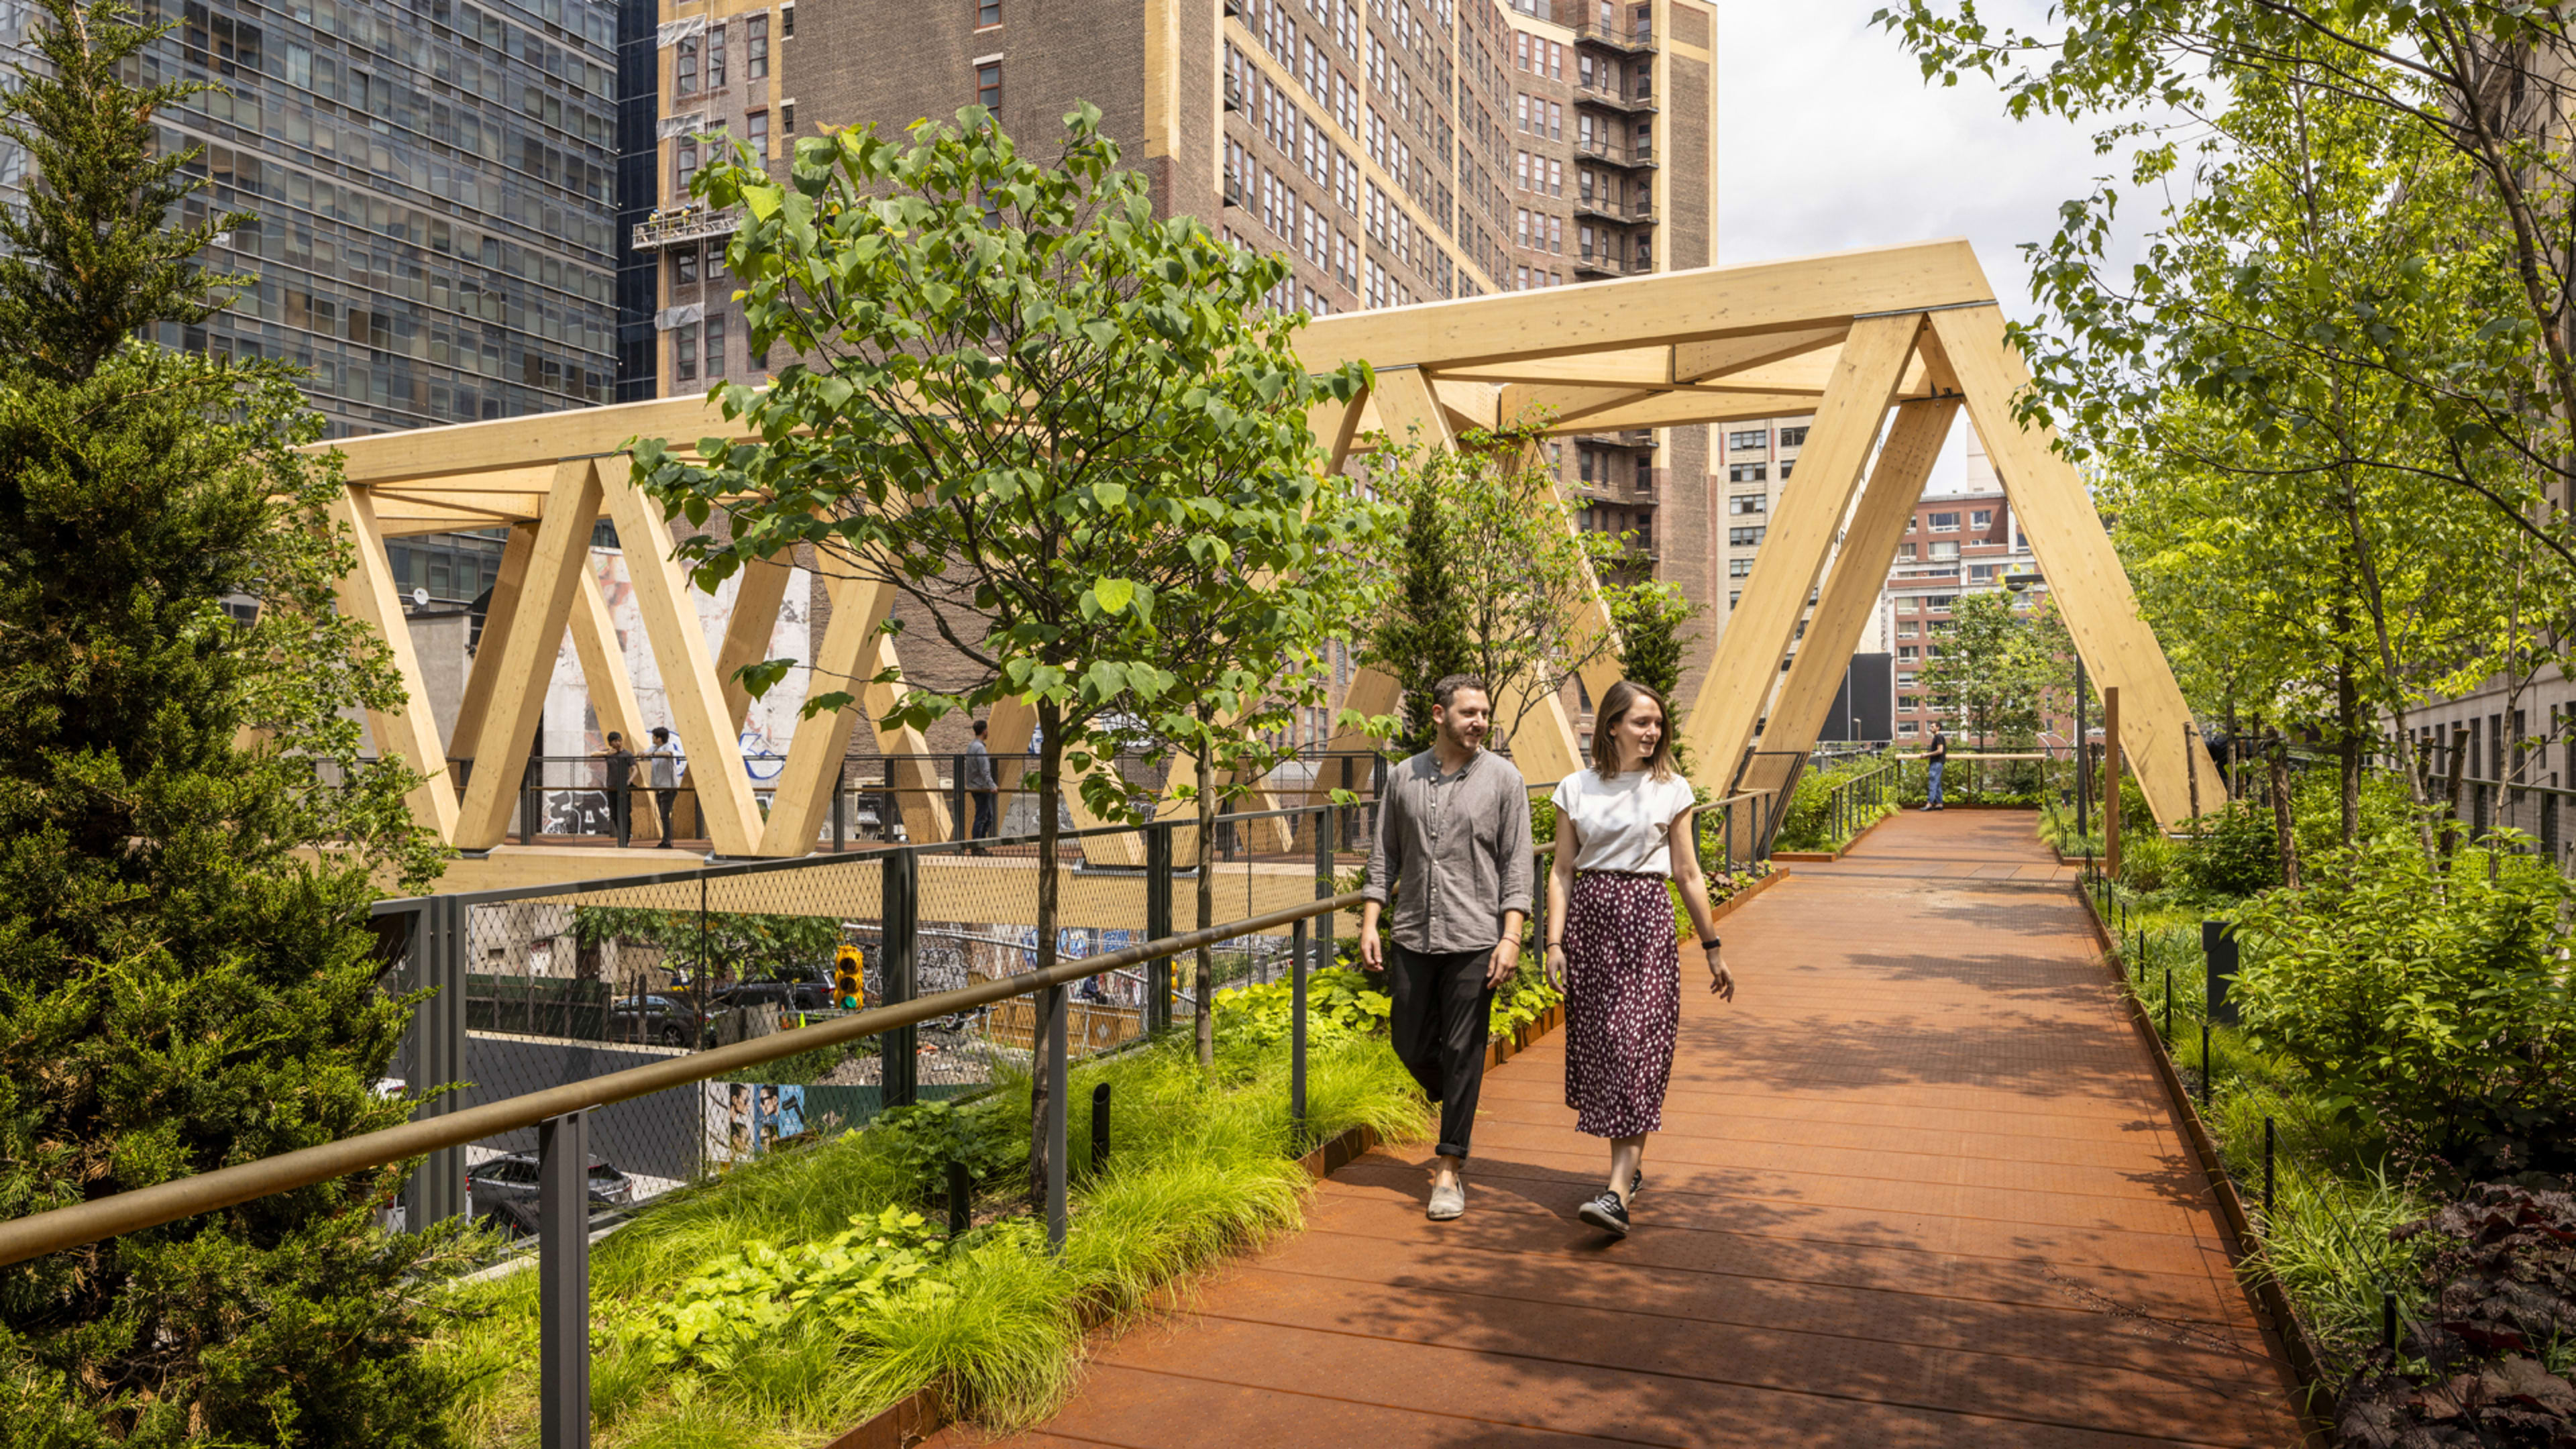 The High Line’s fancy new bridge just made a slice of NYC much more walkable